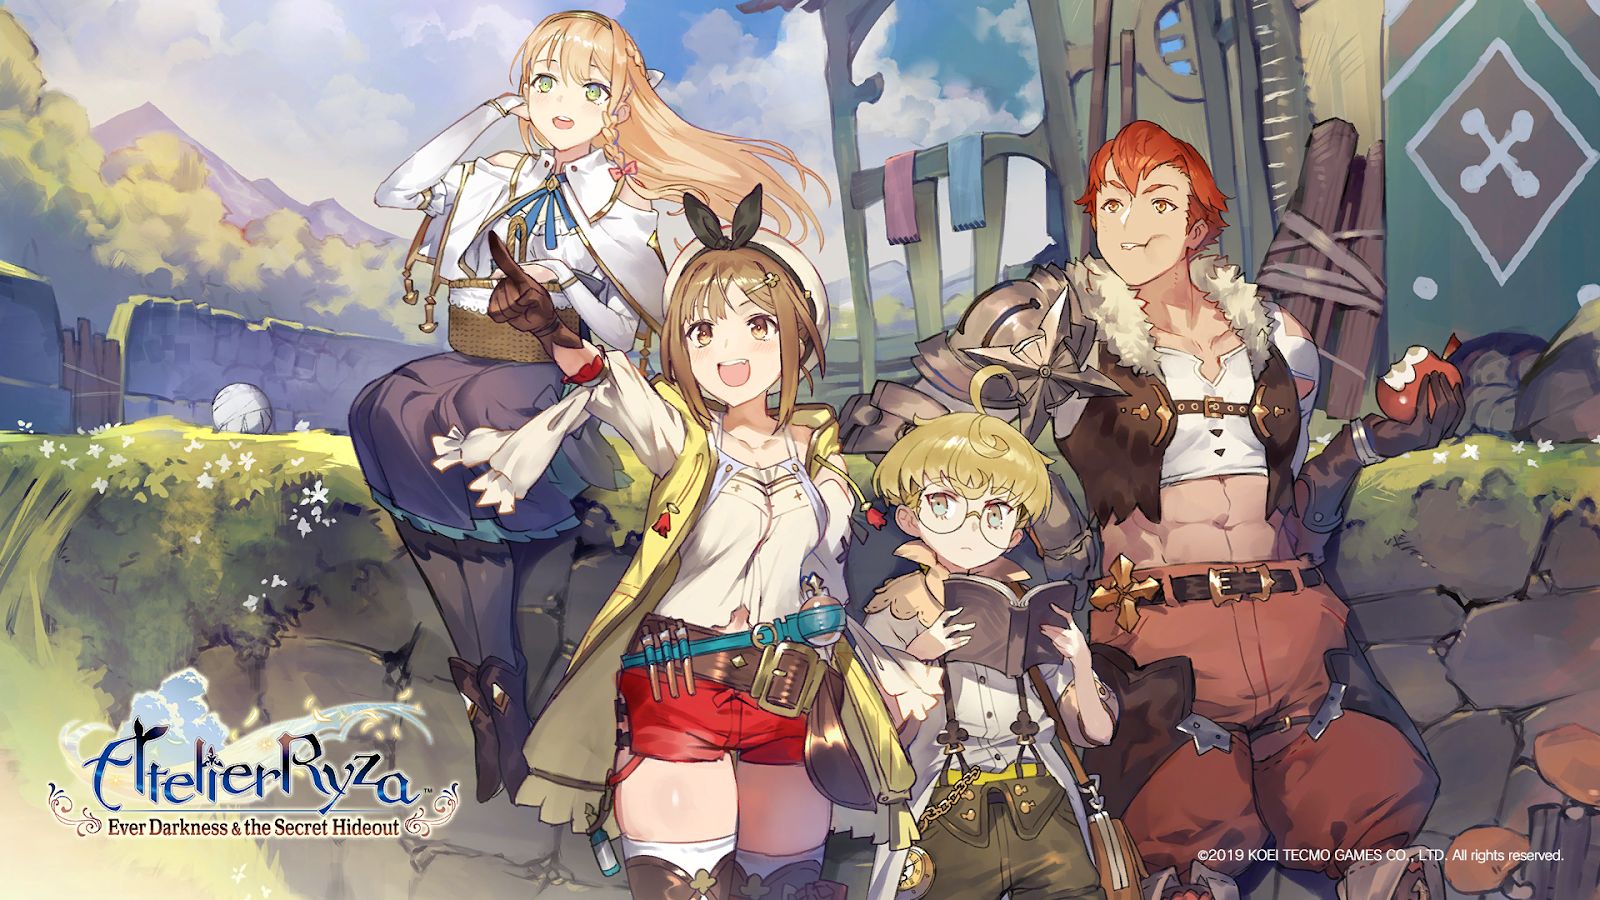 Art of the Atelier Ryza characters as seen in Atelier Ryza: Ever Darkness & The Secret Hideout